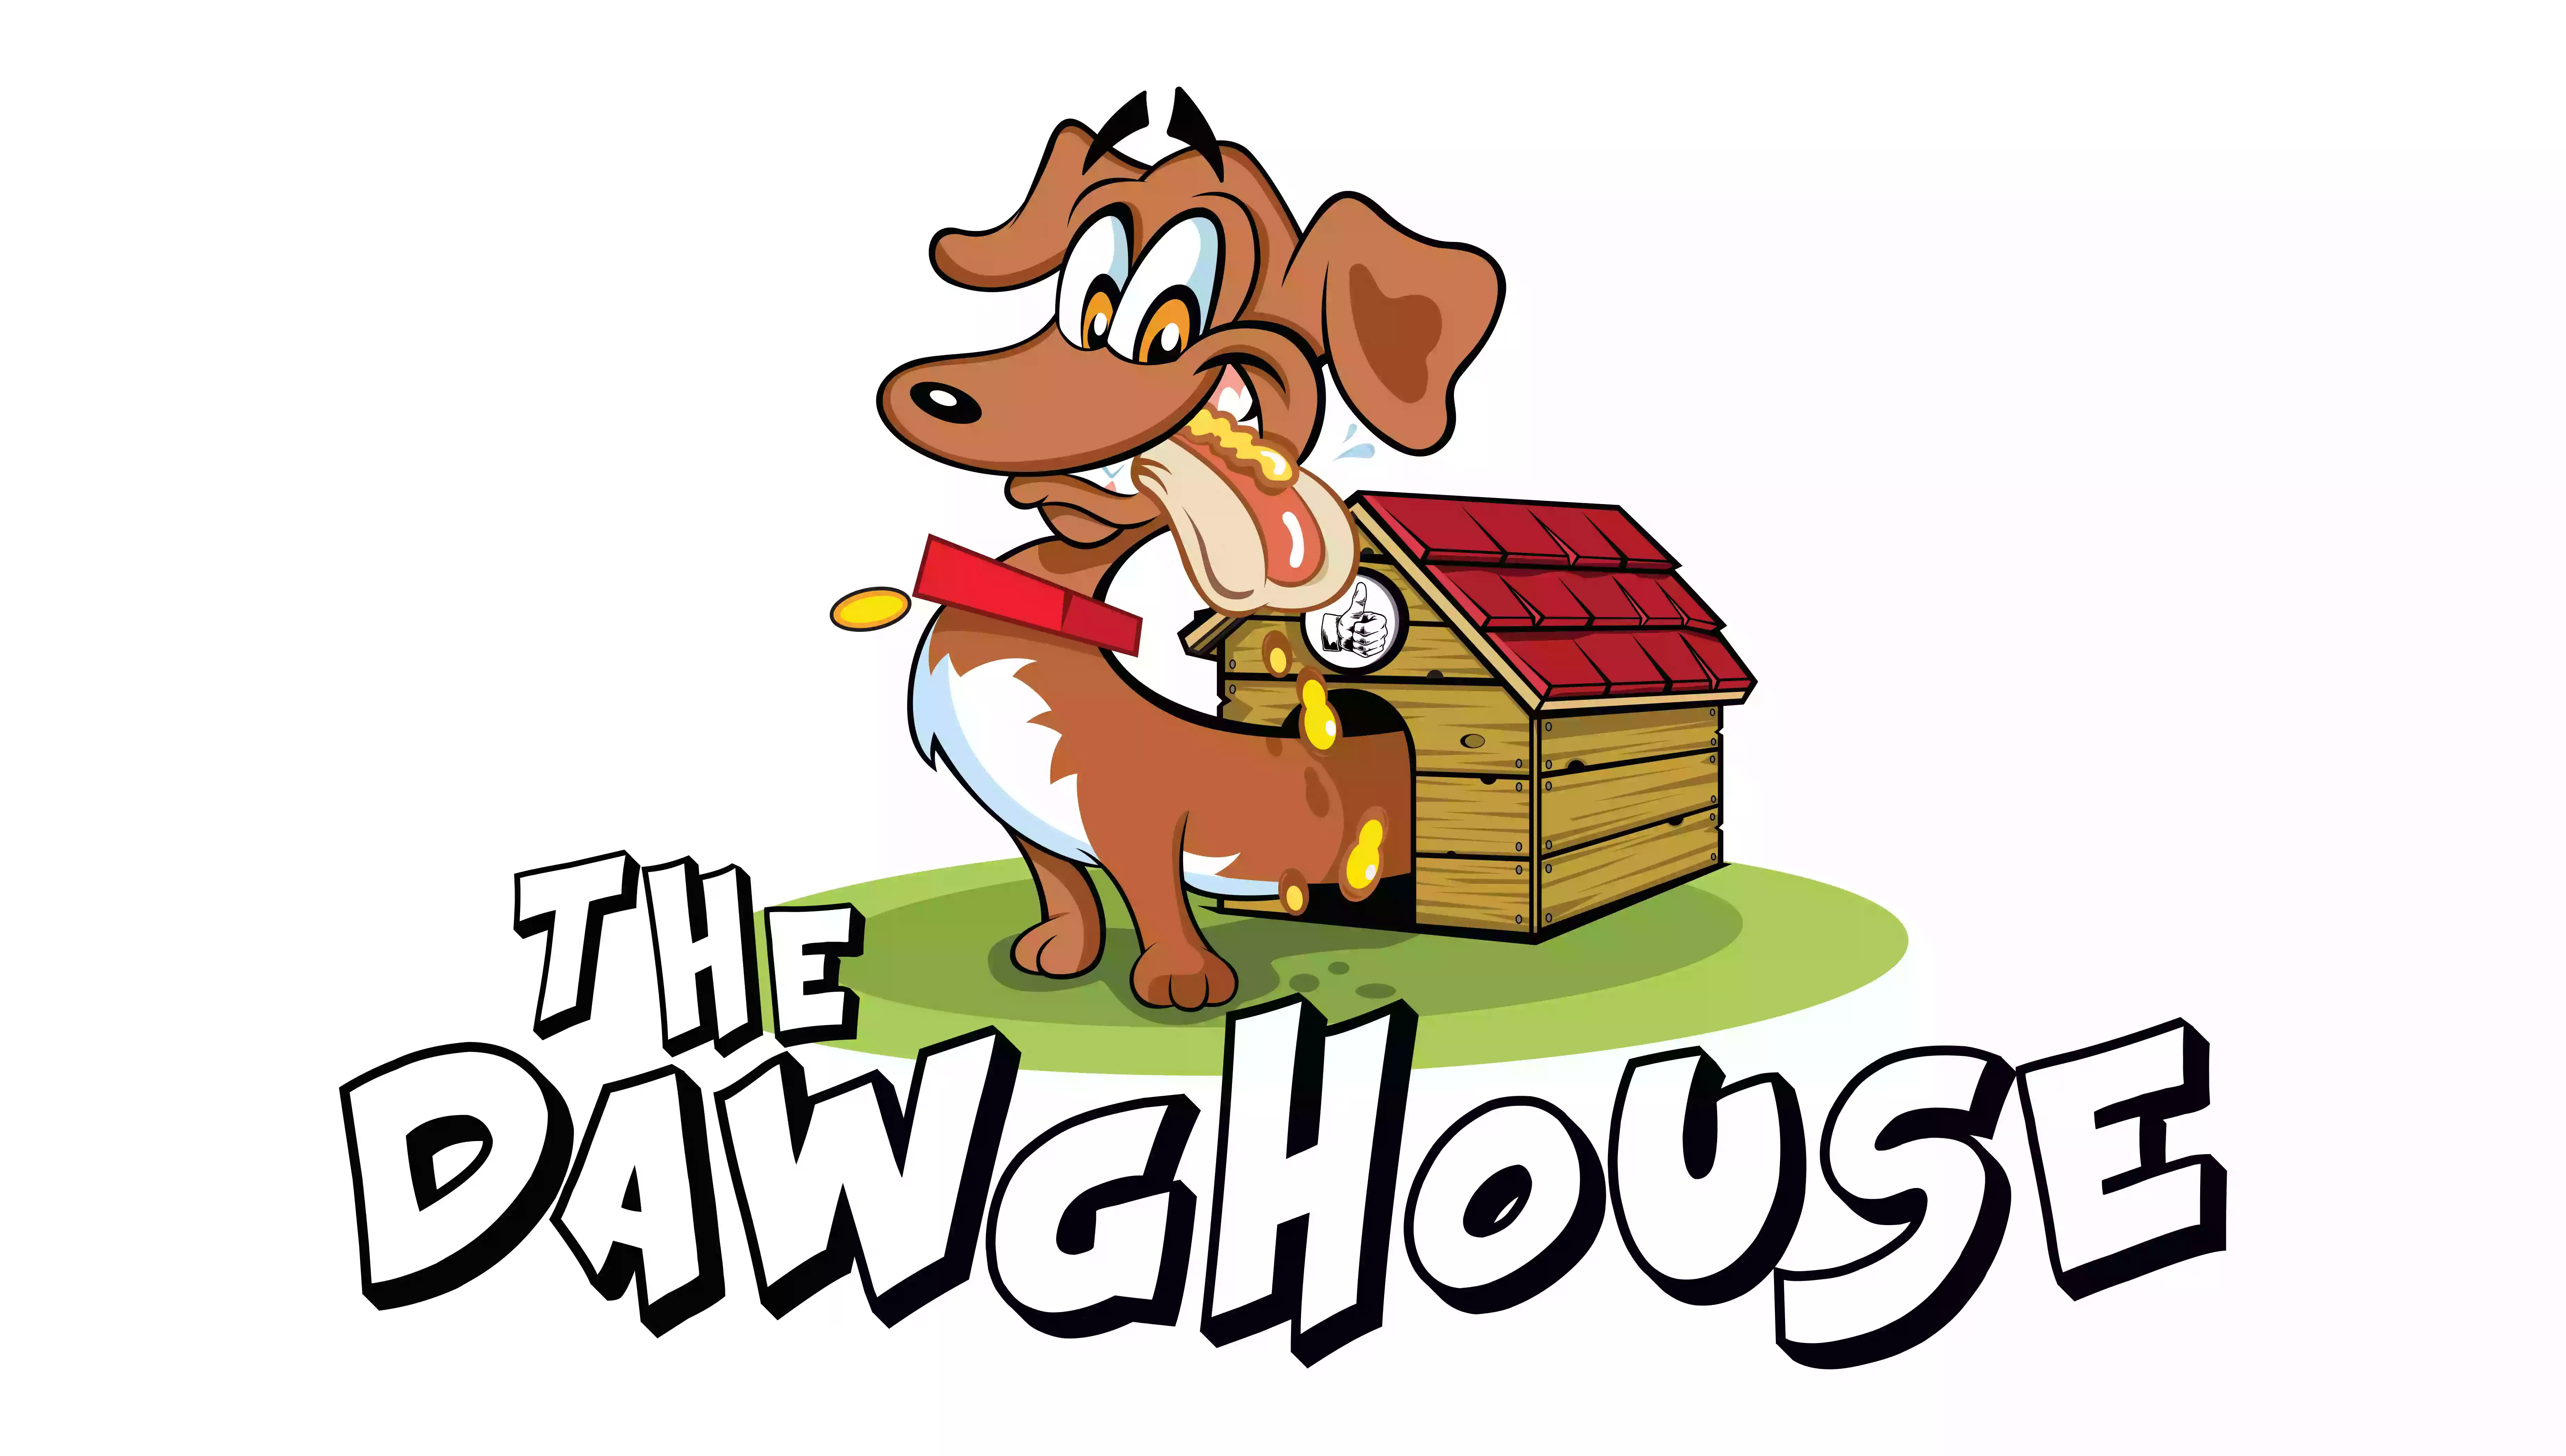 The DawgHouse